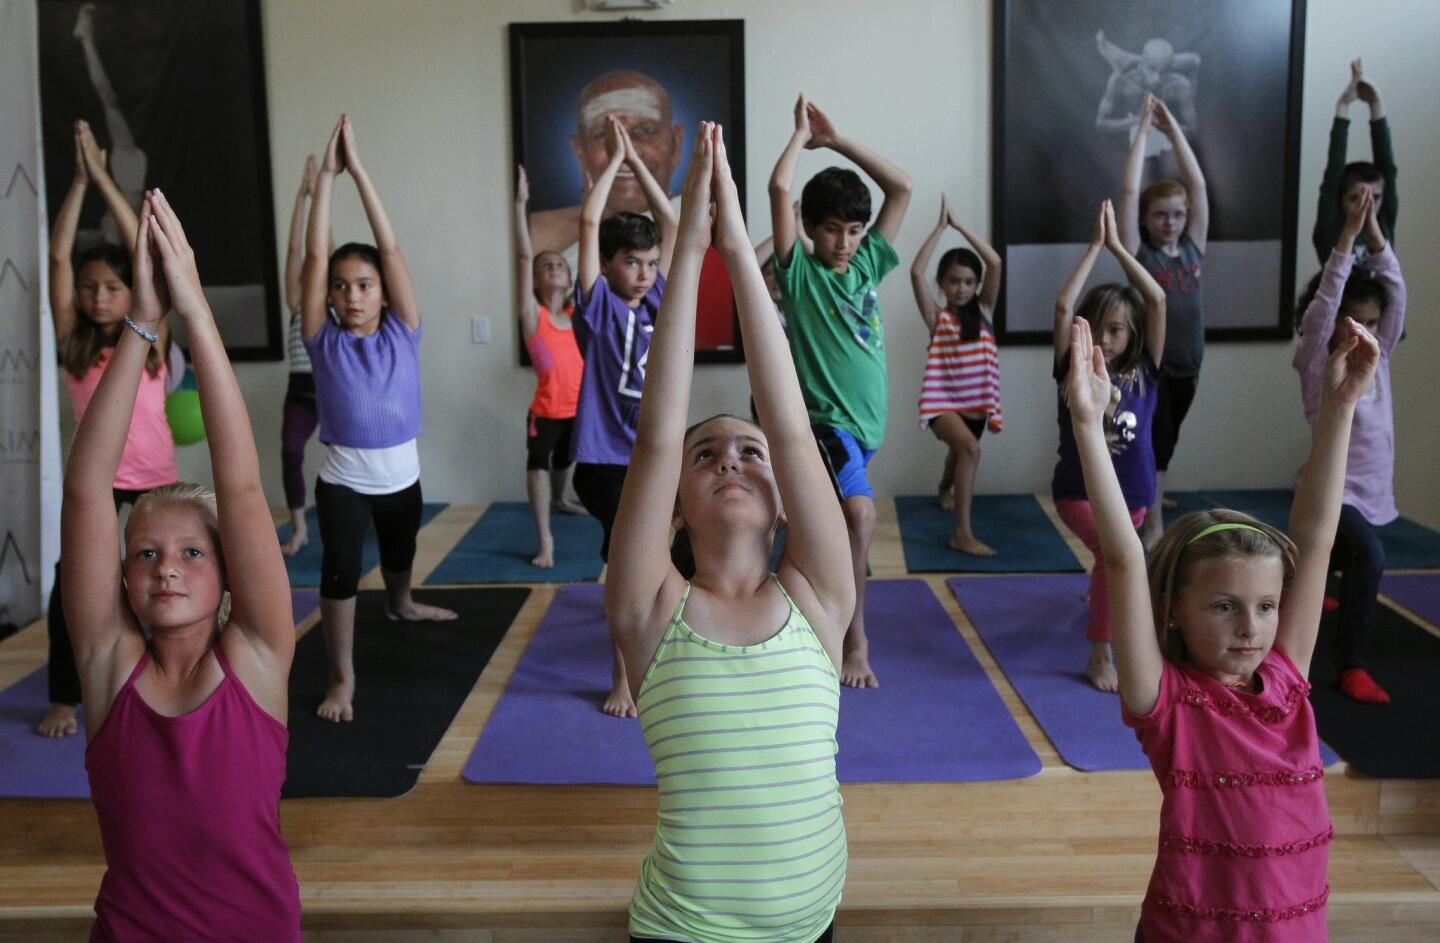 La Costa Heights Elementary School students demonstrate yoga for parents and other adults at the Sonima Foundation yoga studio in Encinitas on Wednesday, April 23, 2014.